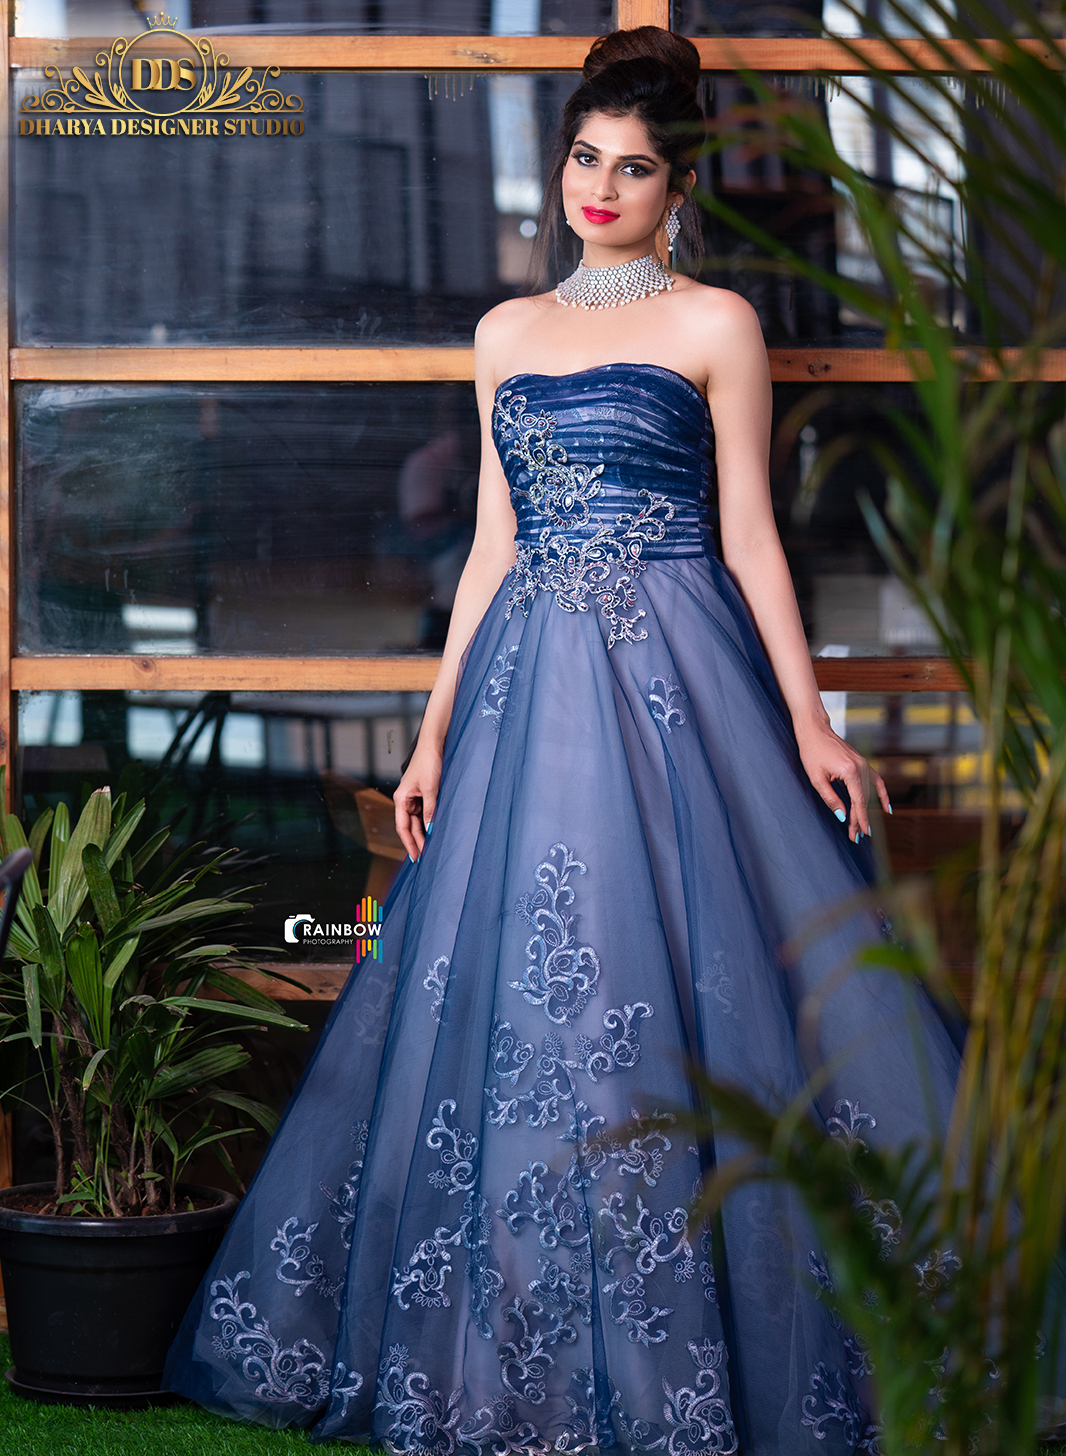 Discover more than 205 best gown design